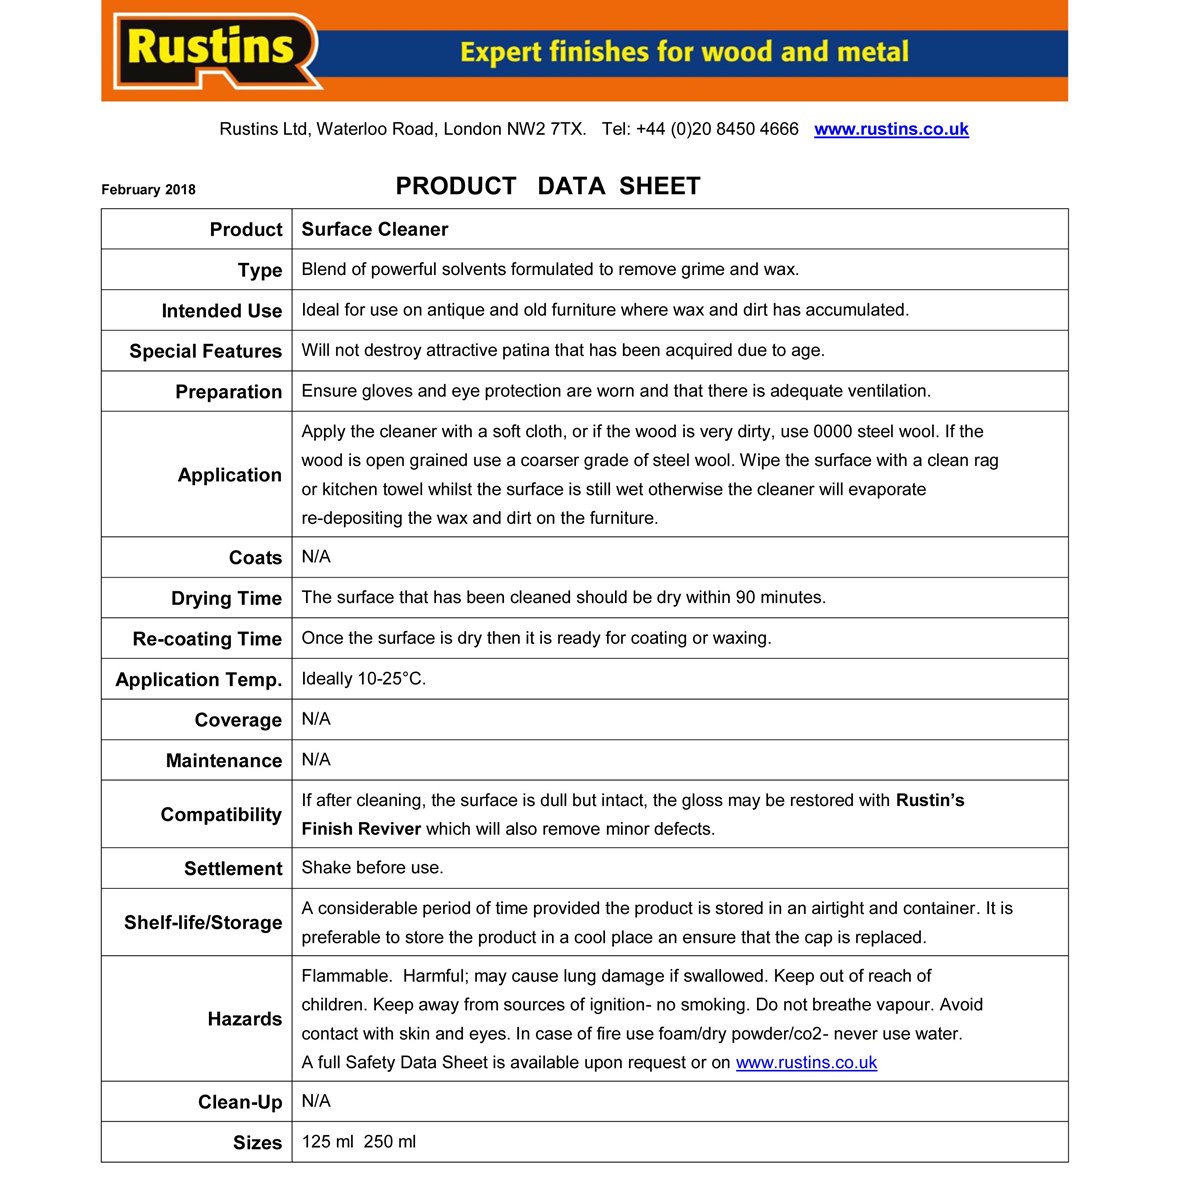 Usage instructions for Rustins Surface Cleaner